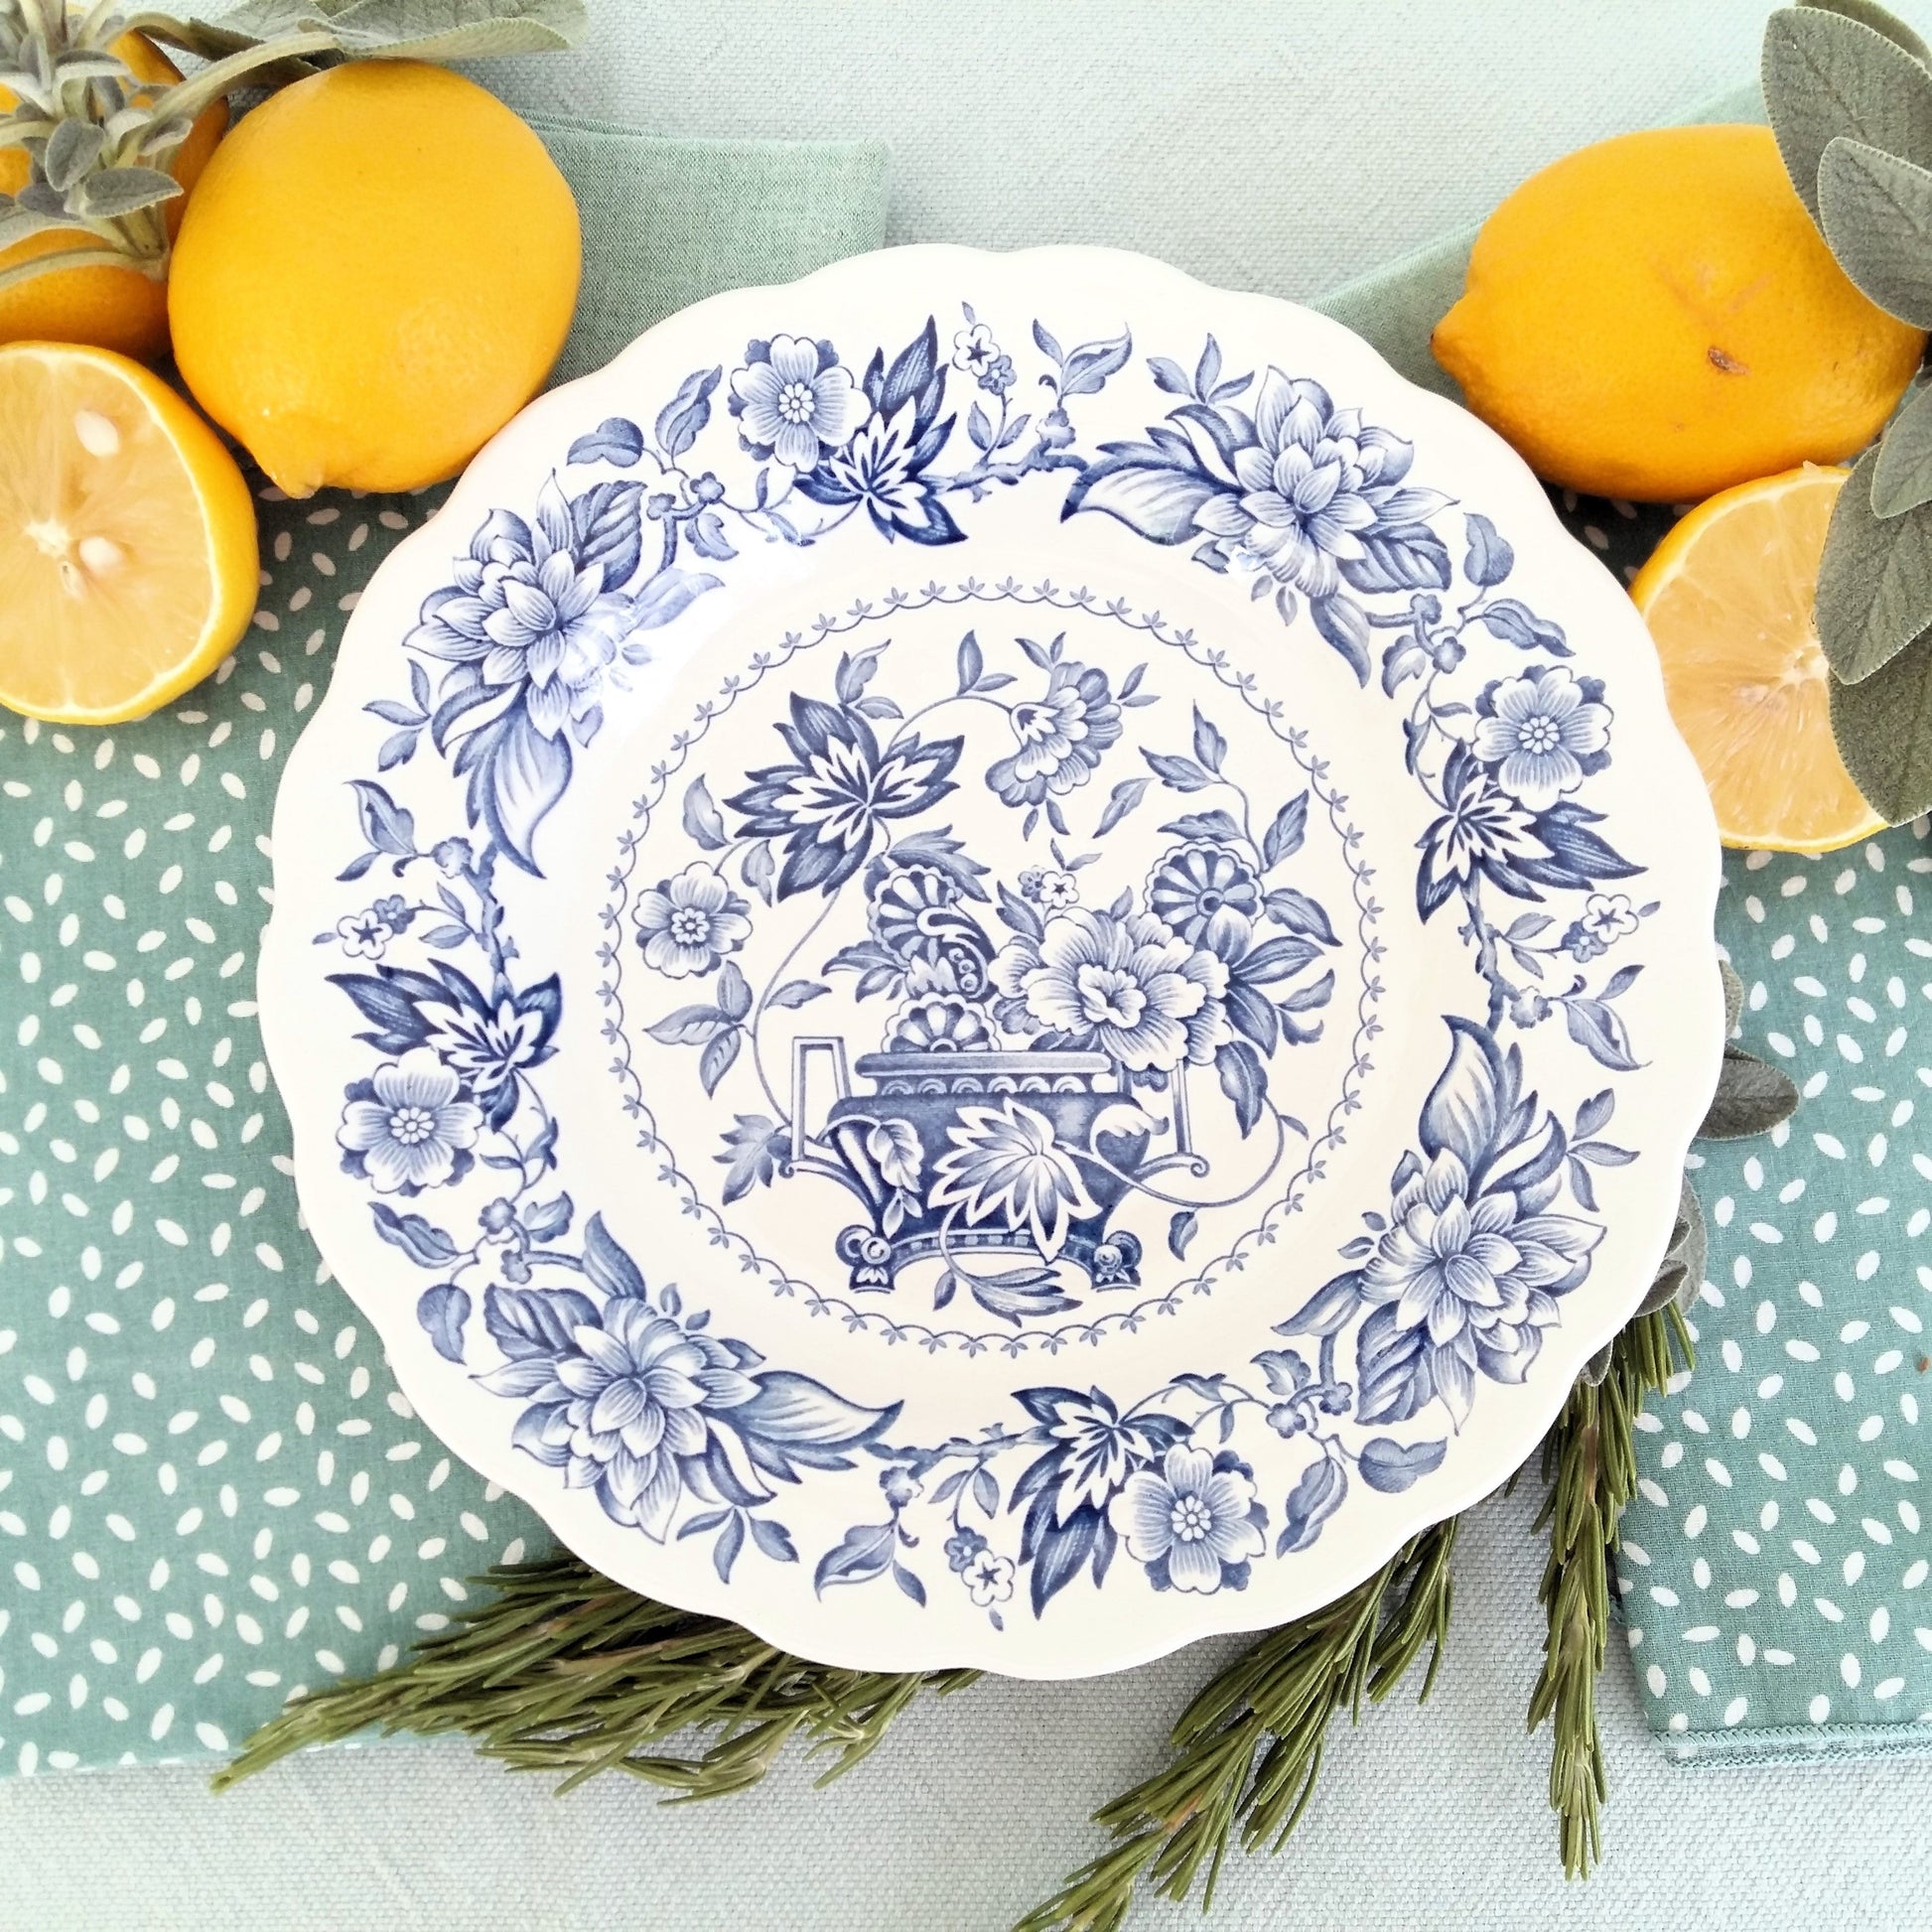 8 mix and match transferware plates From Tiggy & Pip. €199 With FREE worldwide shipping.